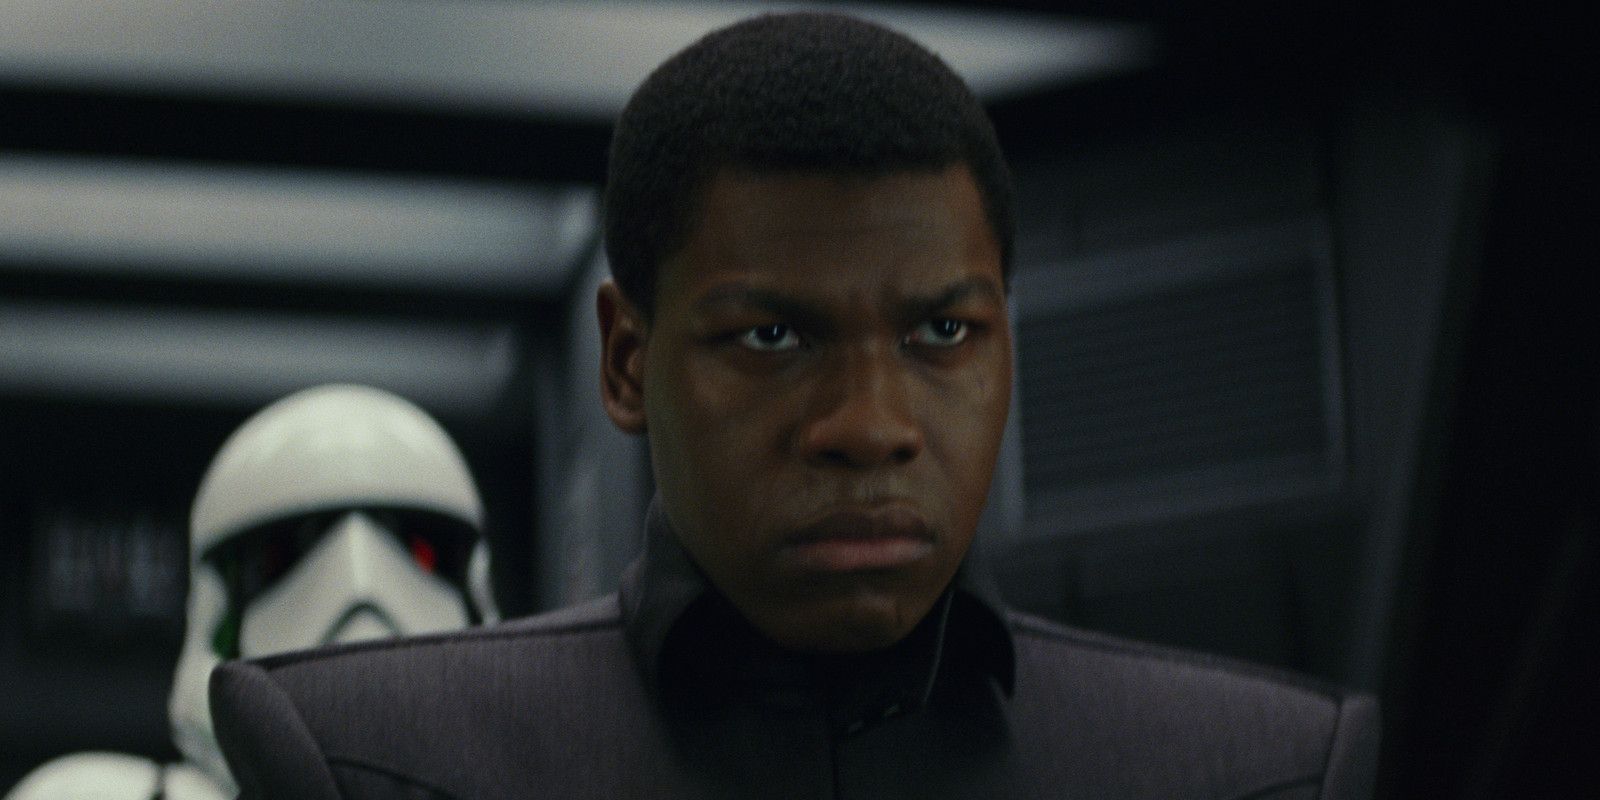 Finn stares angrily forward as a stormtrooper looms behind